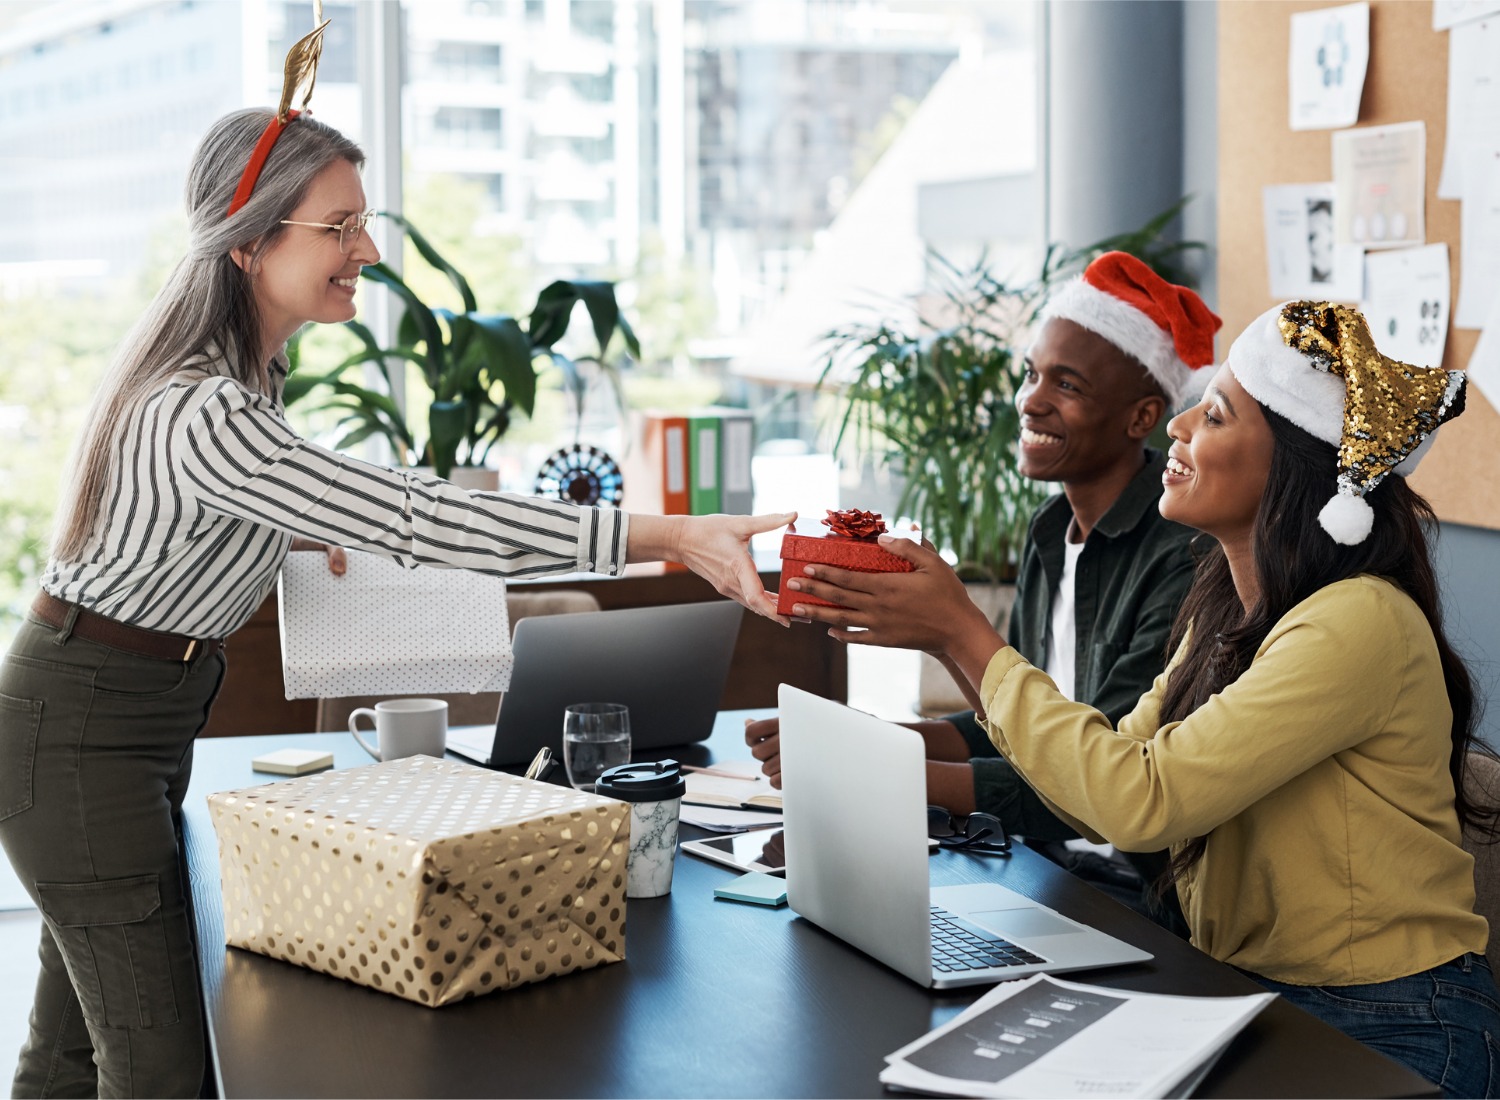 https://www.brit.co/reviews/wp-content/uploads/2023/11/shot-of-a-group-of-businesspeople-exchanging-christmas-gifts-in-a-modern-office.jpg_s1024x1024wisk20cfr4mT14P1Fpz2rgeg8jwgSQEIGFSYyFwCkBeJV4QiC8.jpg